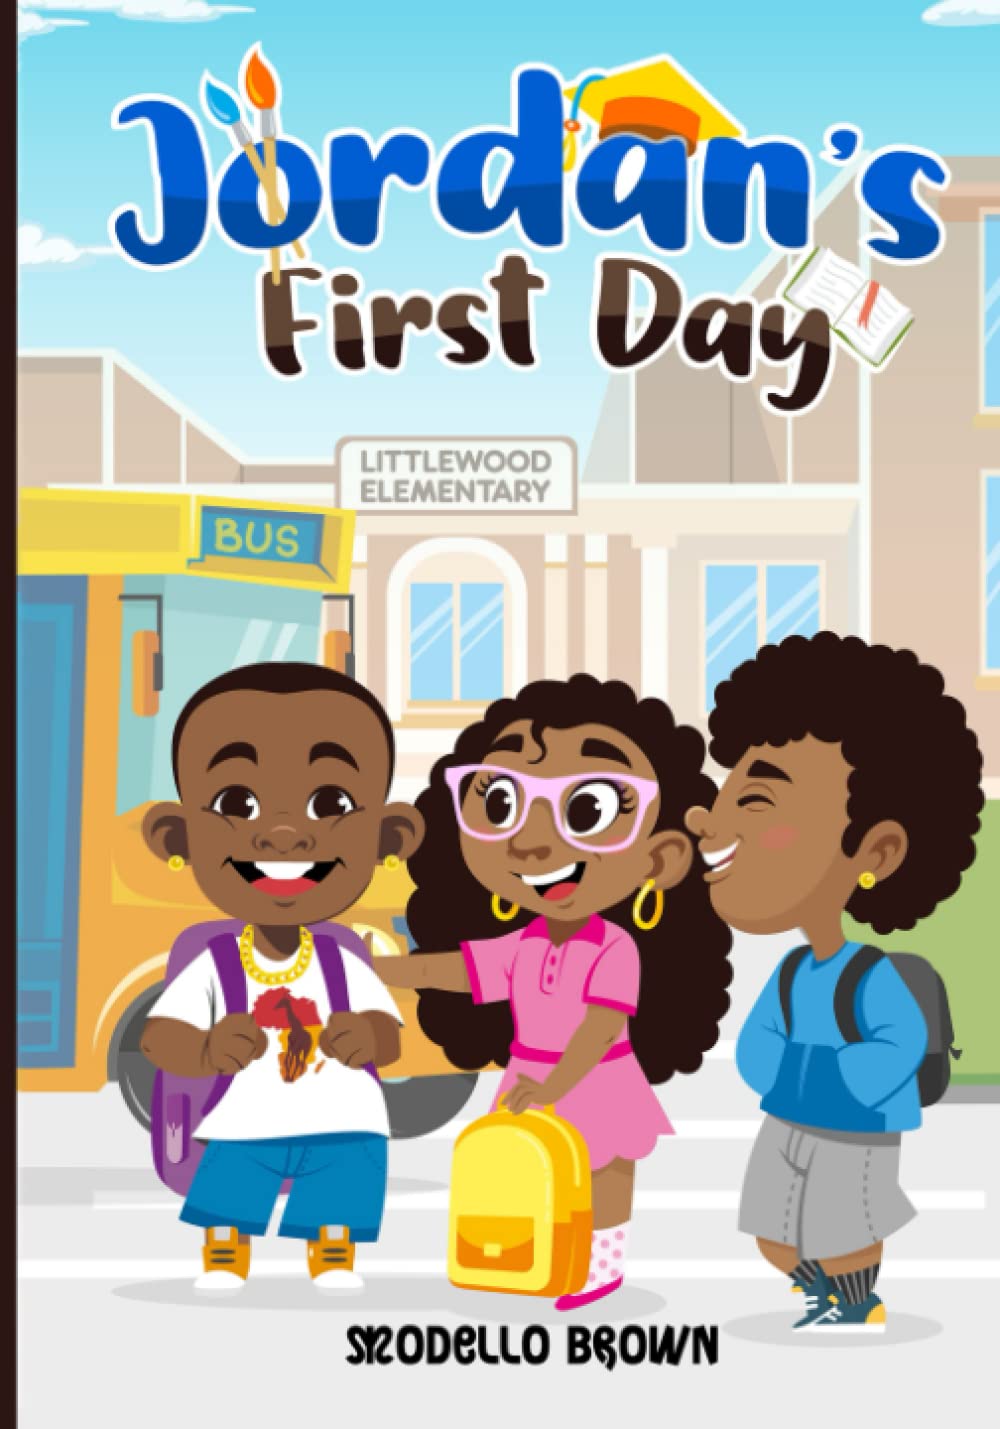 Jordan's First Day by Modello Brown